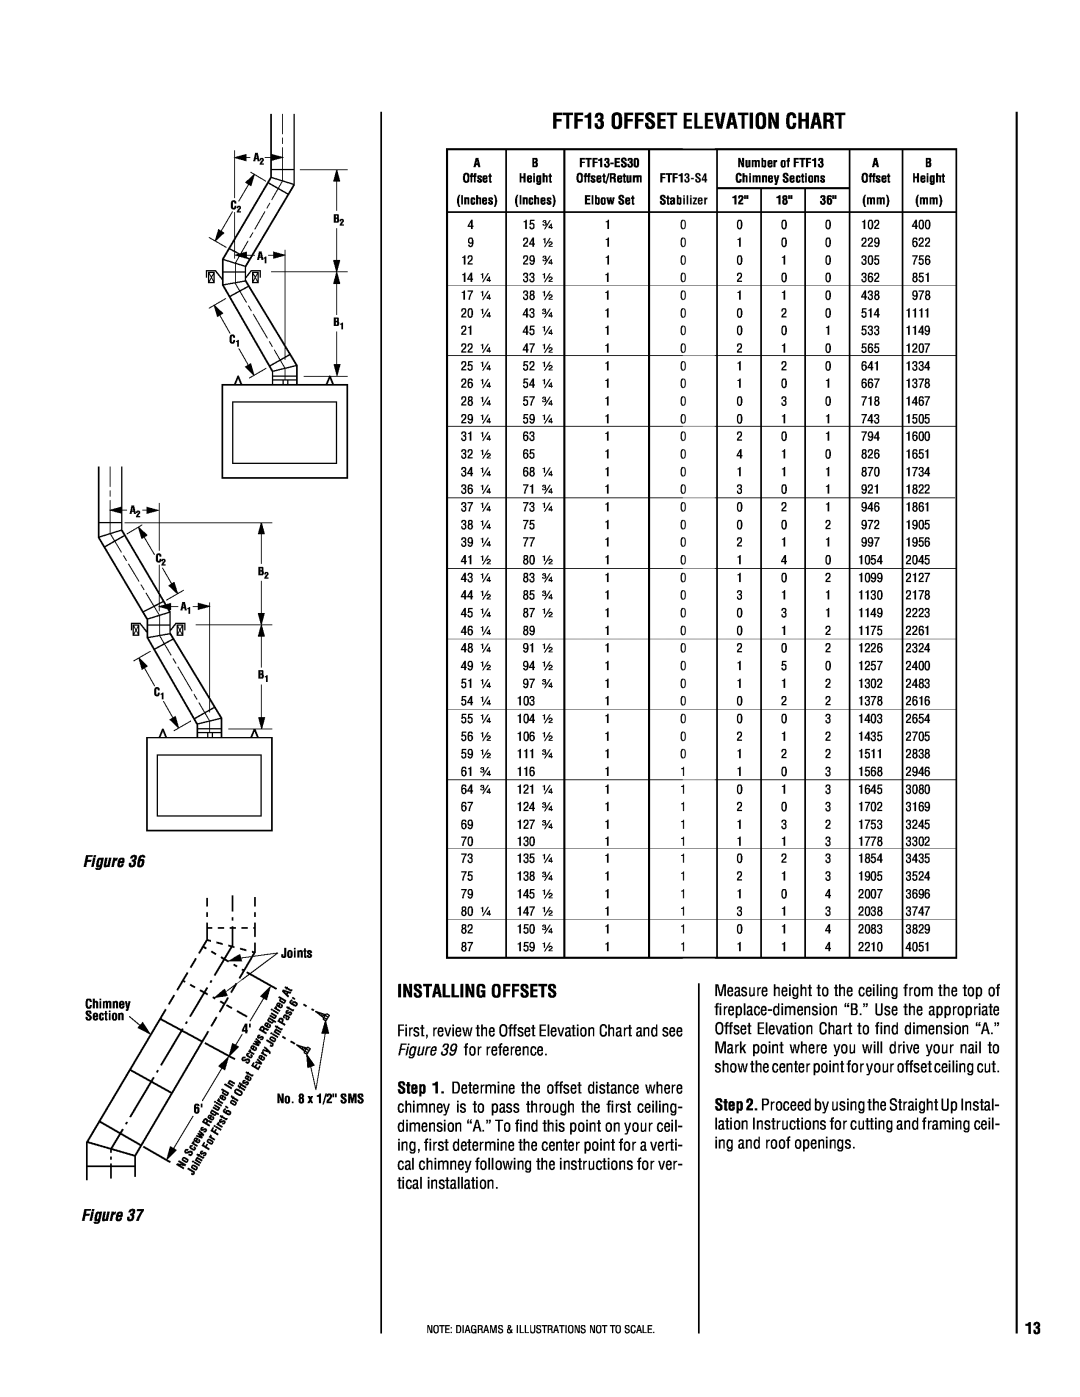 Lucent Technologies EST-48 FTF13 OFFSET ELEVATION CHART, Installing Offsets, Joints, Chimney, Section 